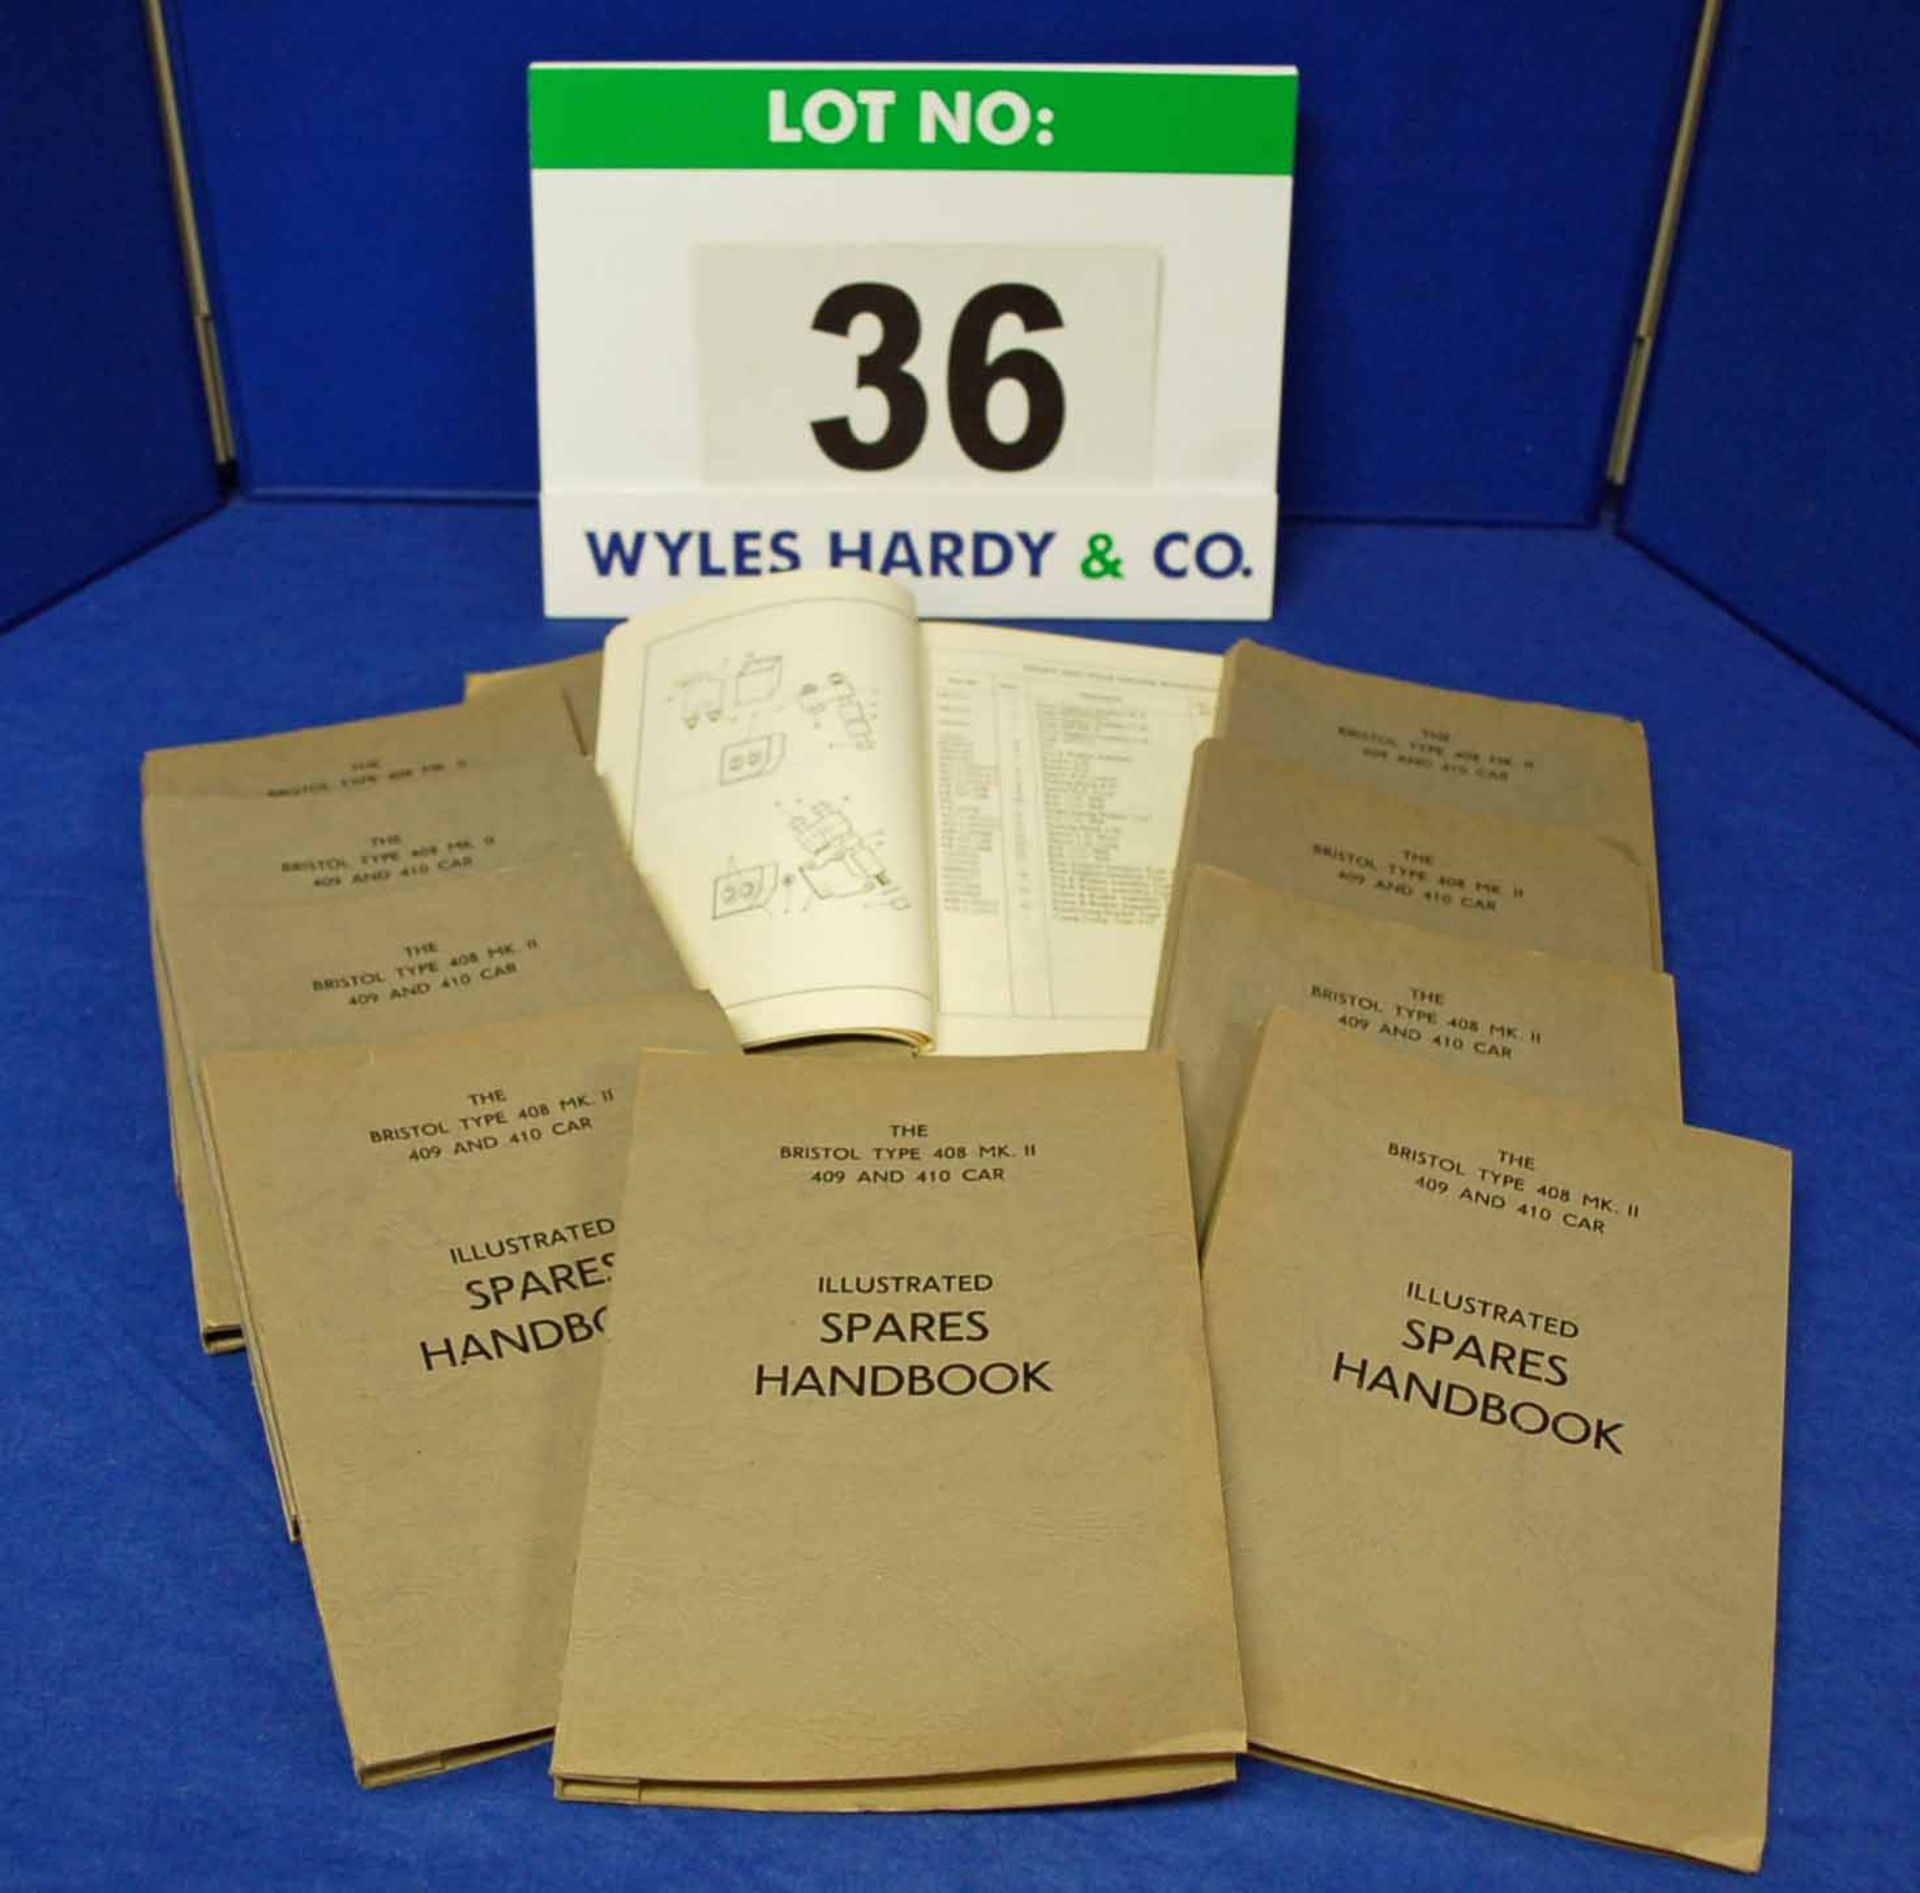 Ten Copies of the Spares Handbook for The Bristol Type 408 M II, 409 and 410 Car